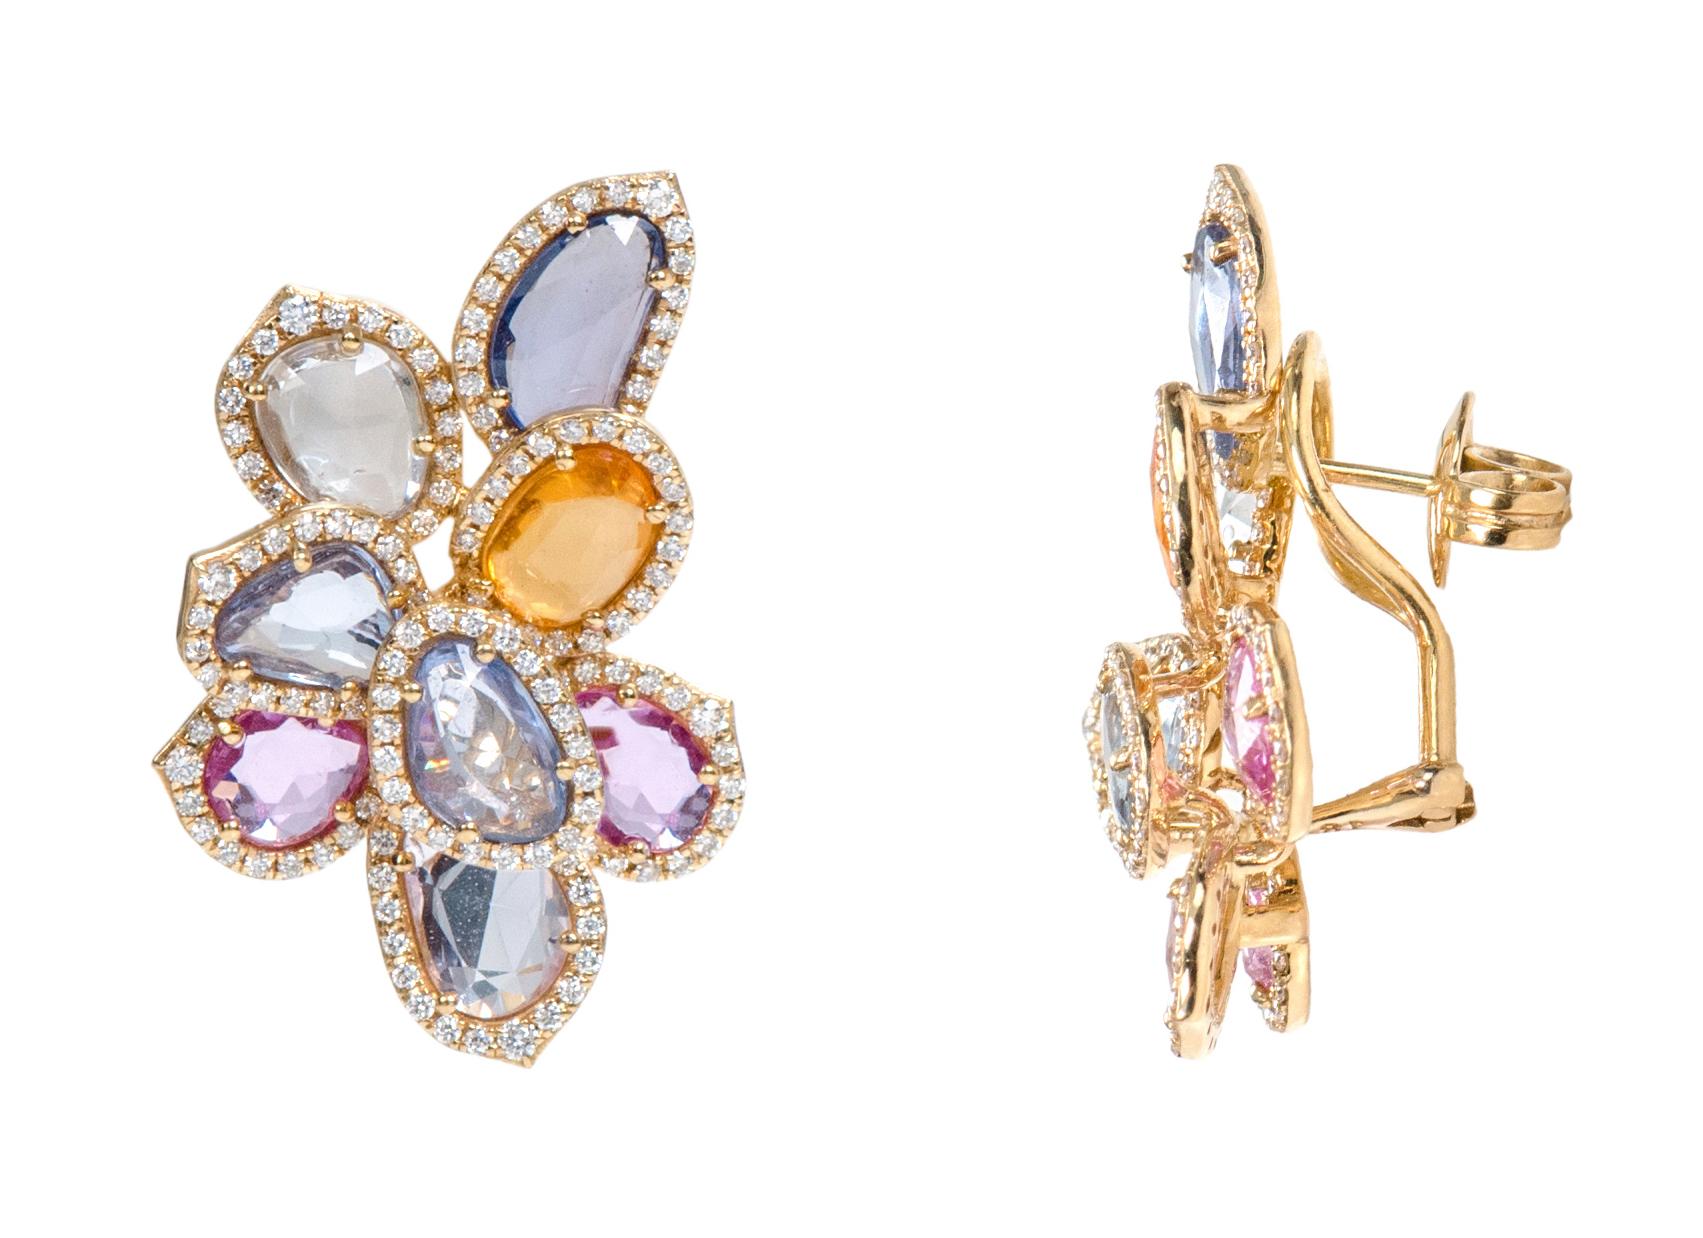 18 Karat Yellow Gold 13.56 Carat Multi-Sapphire and Diamond Cocktail Stud Earrings

This illustrious rainbow multi-sapphire and diamond stud earring is exquisite. The uneven mix shape rose cut multi-sapphires are skillfully placed one over the other